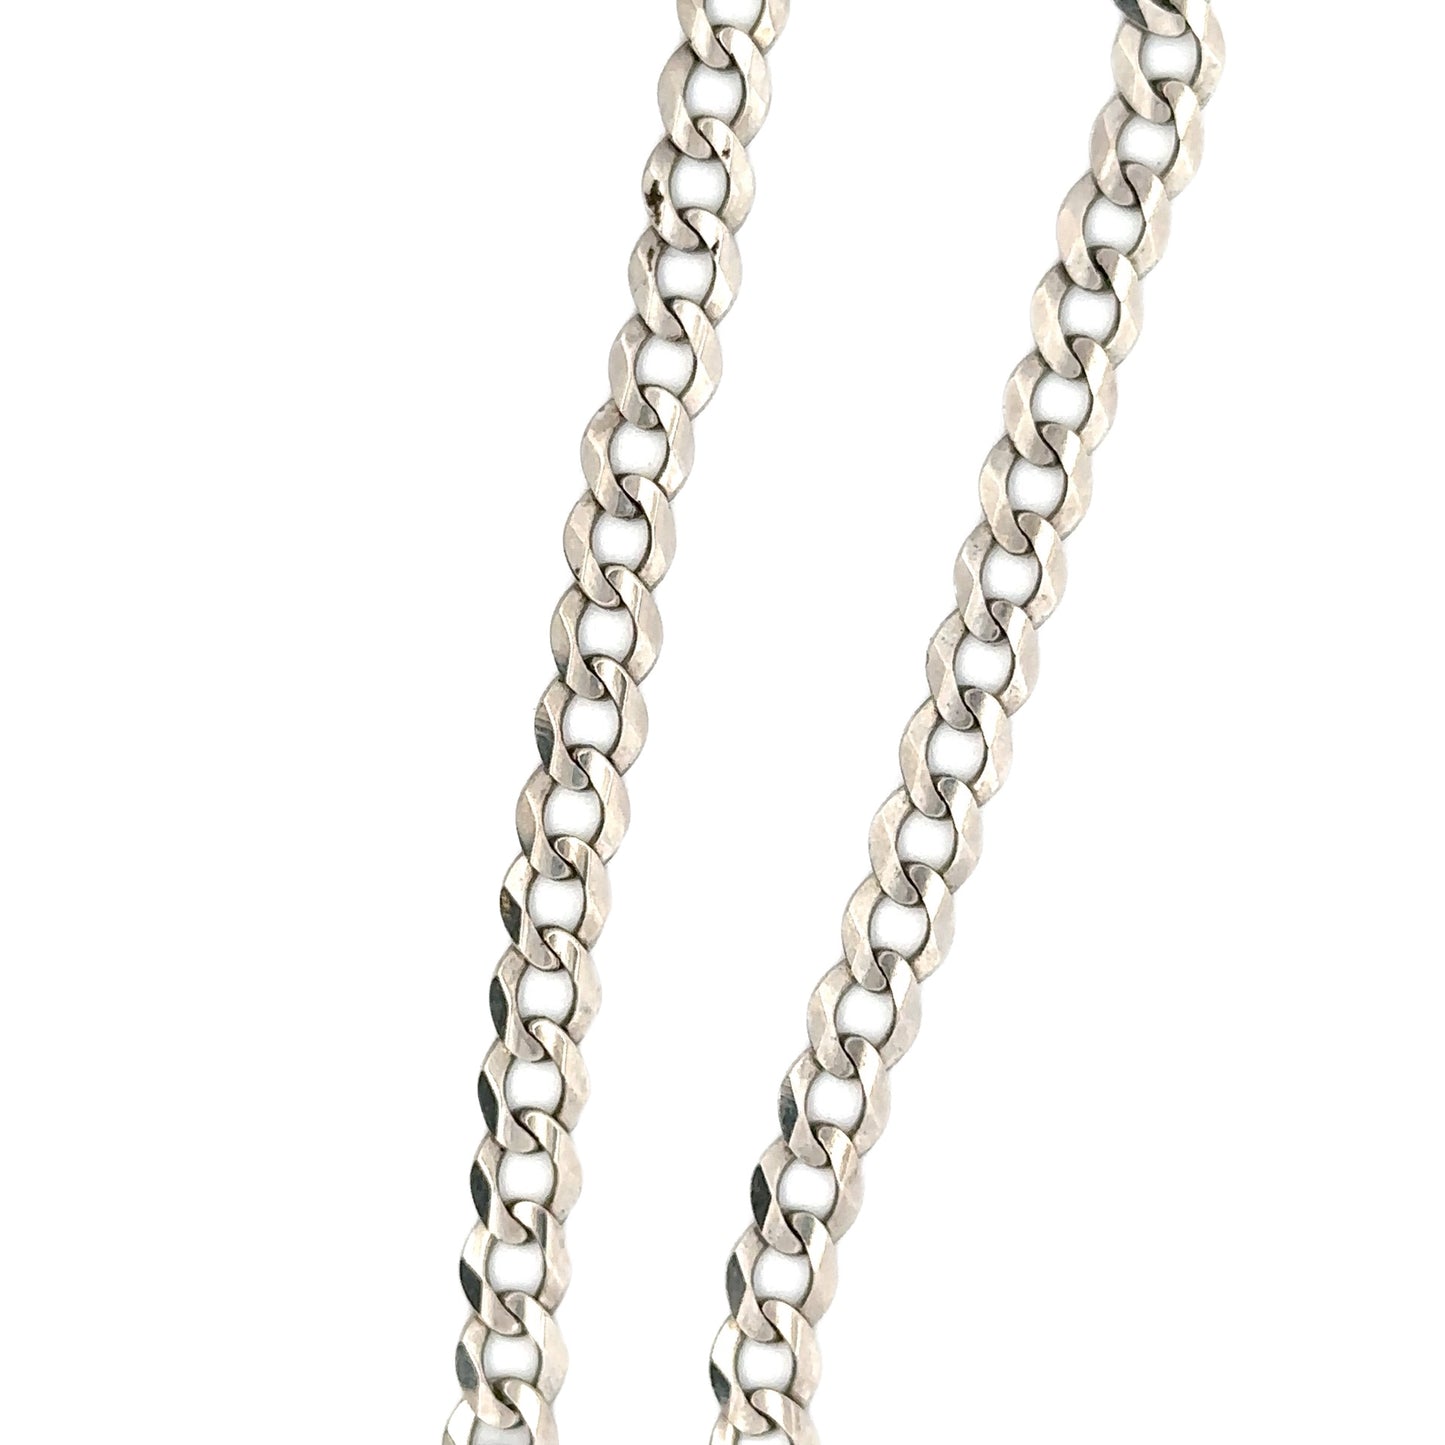 Close up 14K White Gold Link Chain